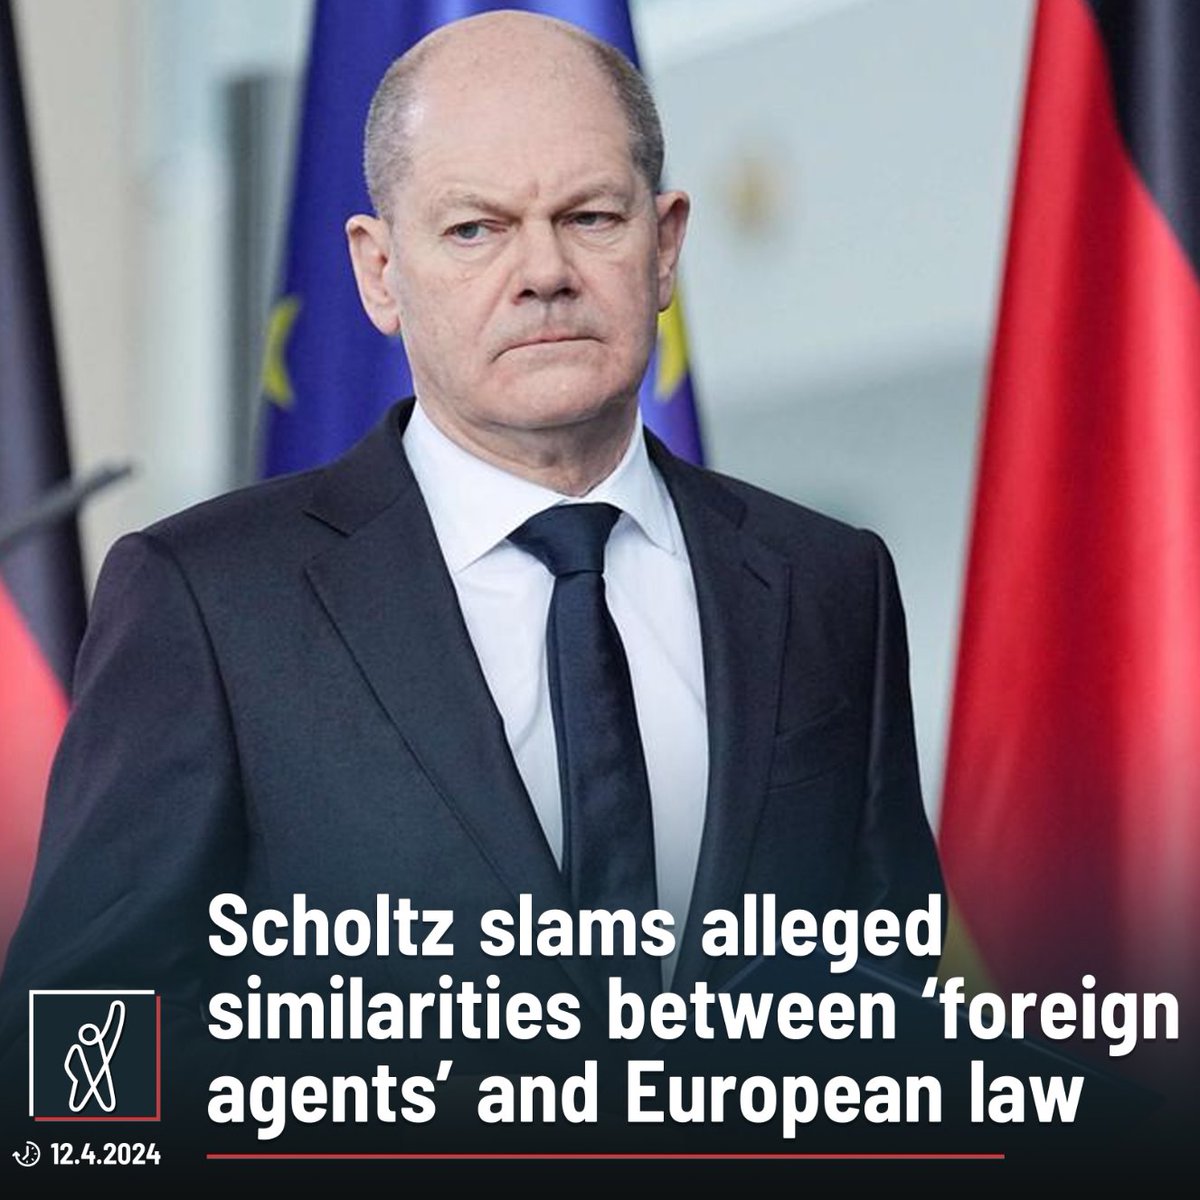 'The EU has no such law. There are discussions to do something that makes certain areas transparent. But this is a different law, a different concept and has not been decided,' @OlafScholz responded to GD-linked TV Imedi's claim West also adopts similar laws on transparency.